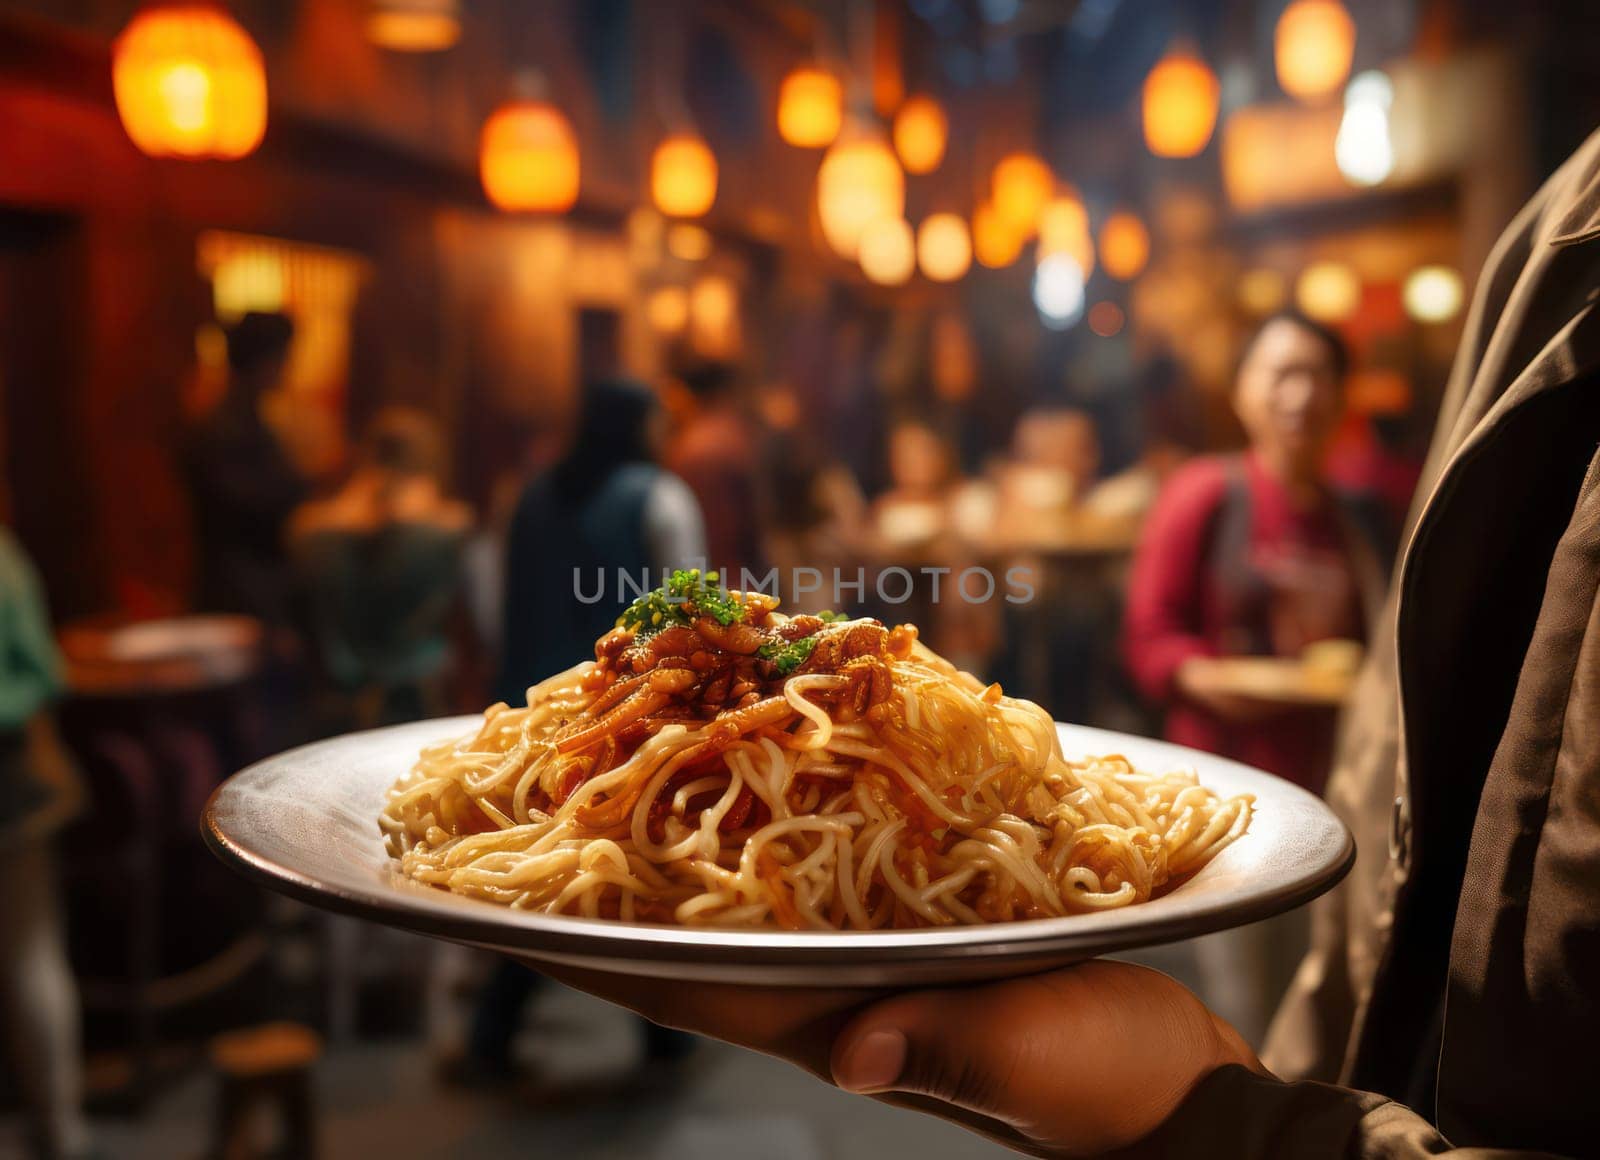 Delicious Asian Dish: Traditional Meal with Fresh Noodles, Chinese Sauce, and Gourmet Meat in a Tasty Closeup Bowl.